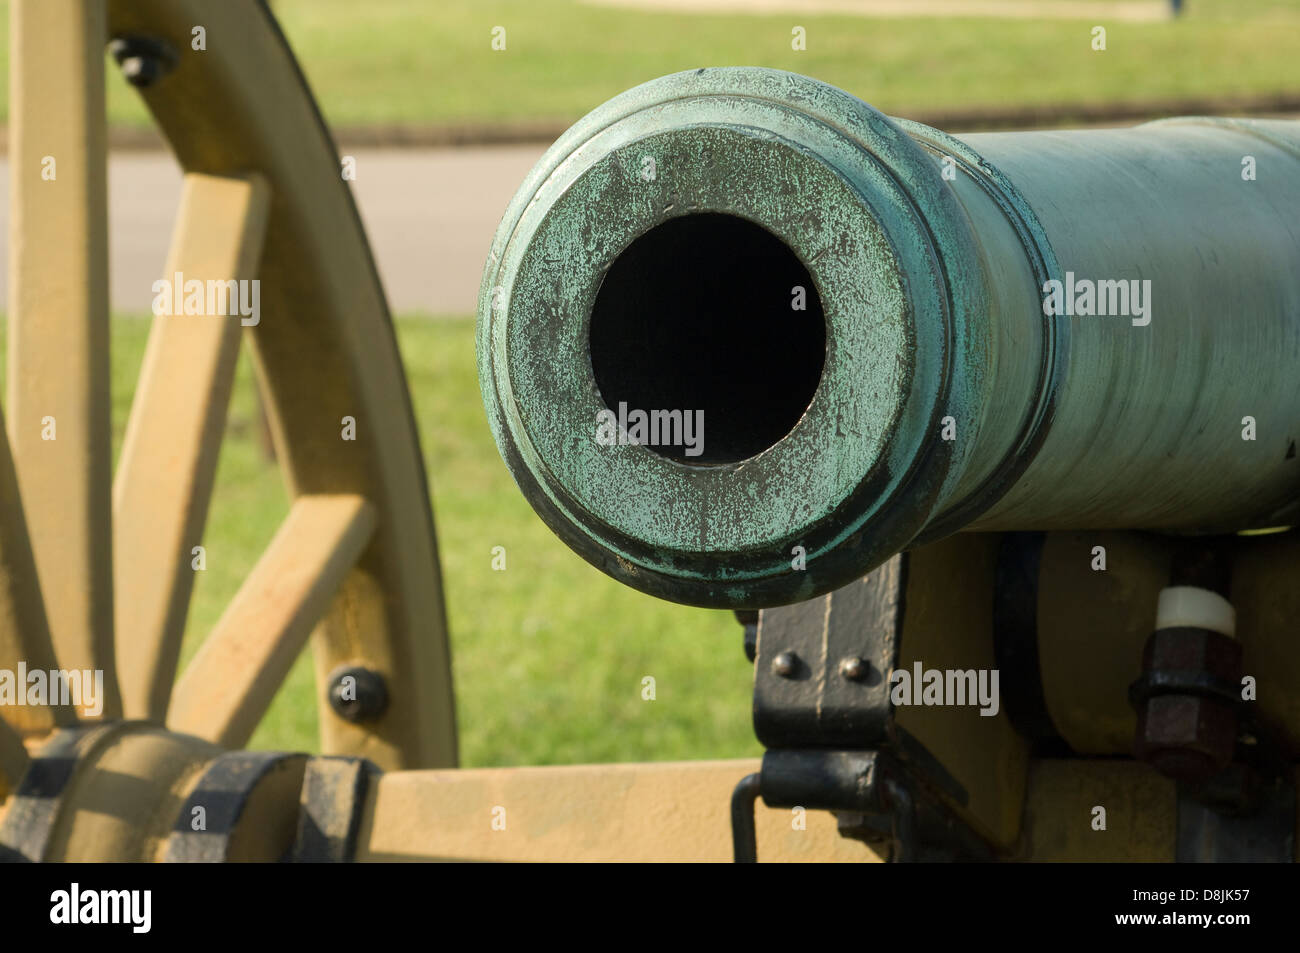 Muzzle of a Model 1841 6-pounder smoothbore cannon, Shiloh National Military Park, Tennessee. Digital photograph Stock Photo